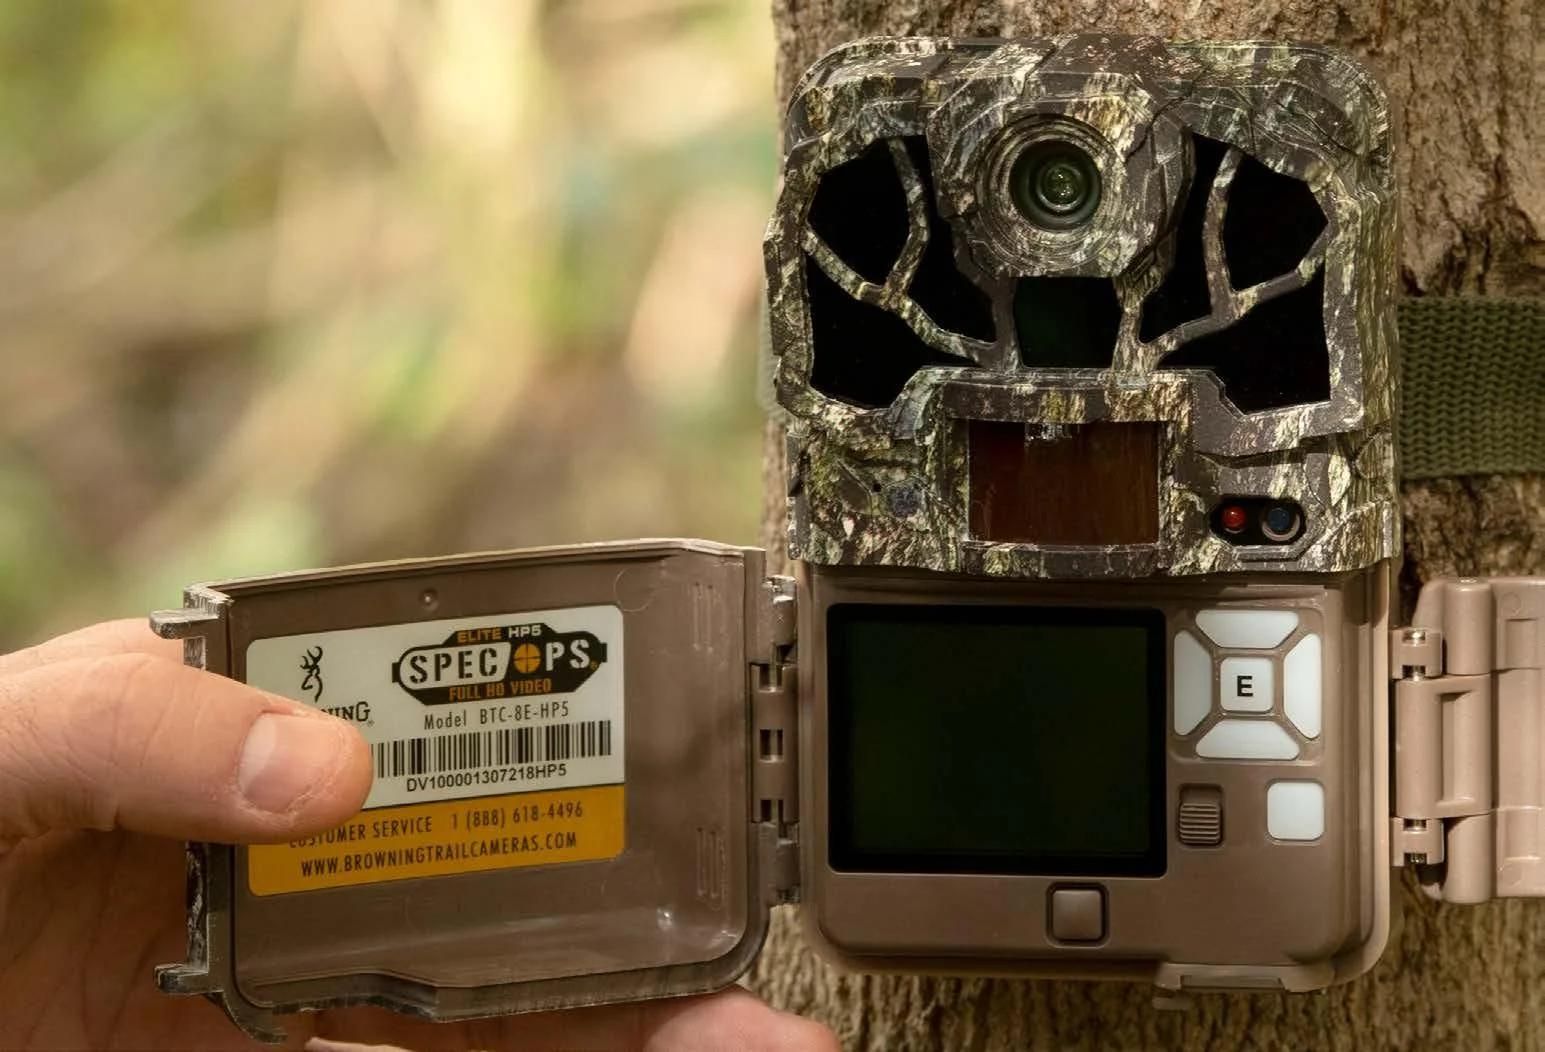 What Are The Best Browning Trail Cameras For Home Surveillance